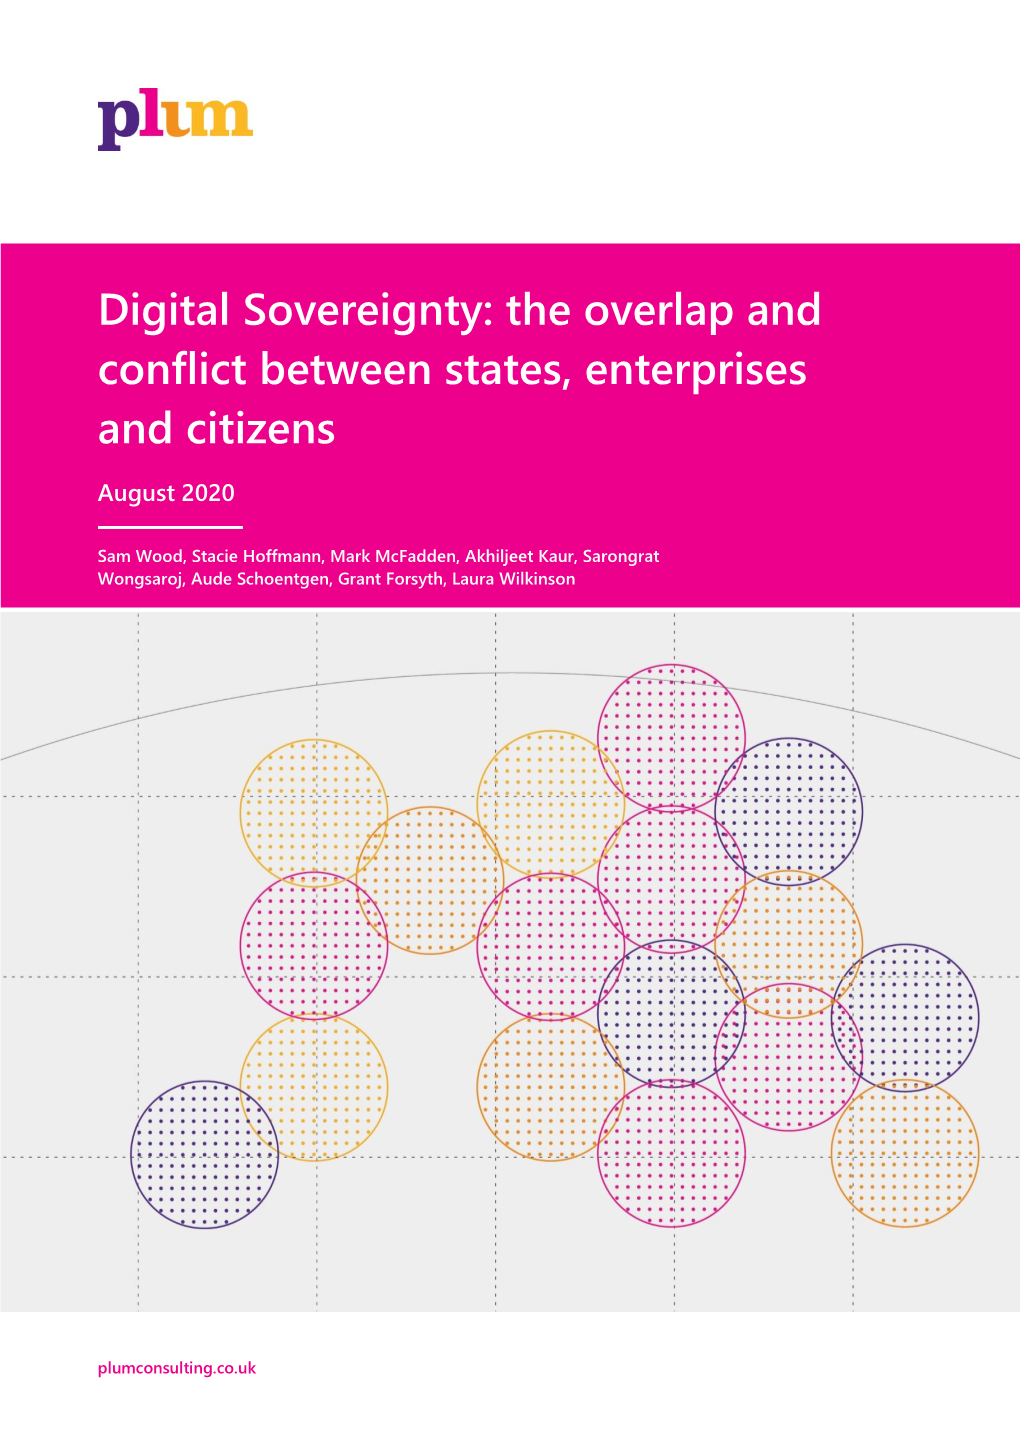 Digital Sovereignty: the Overlap and Conflict Between States, Enterprises and Citizens